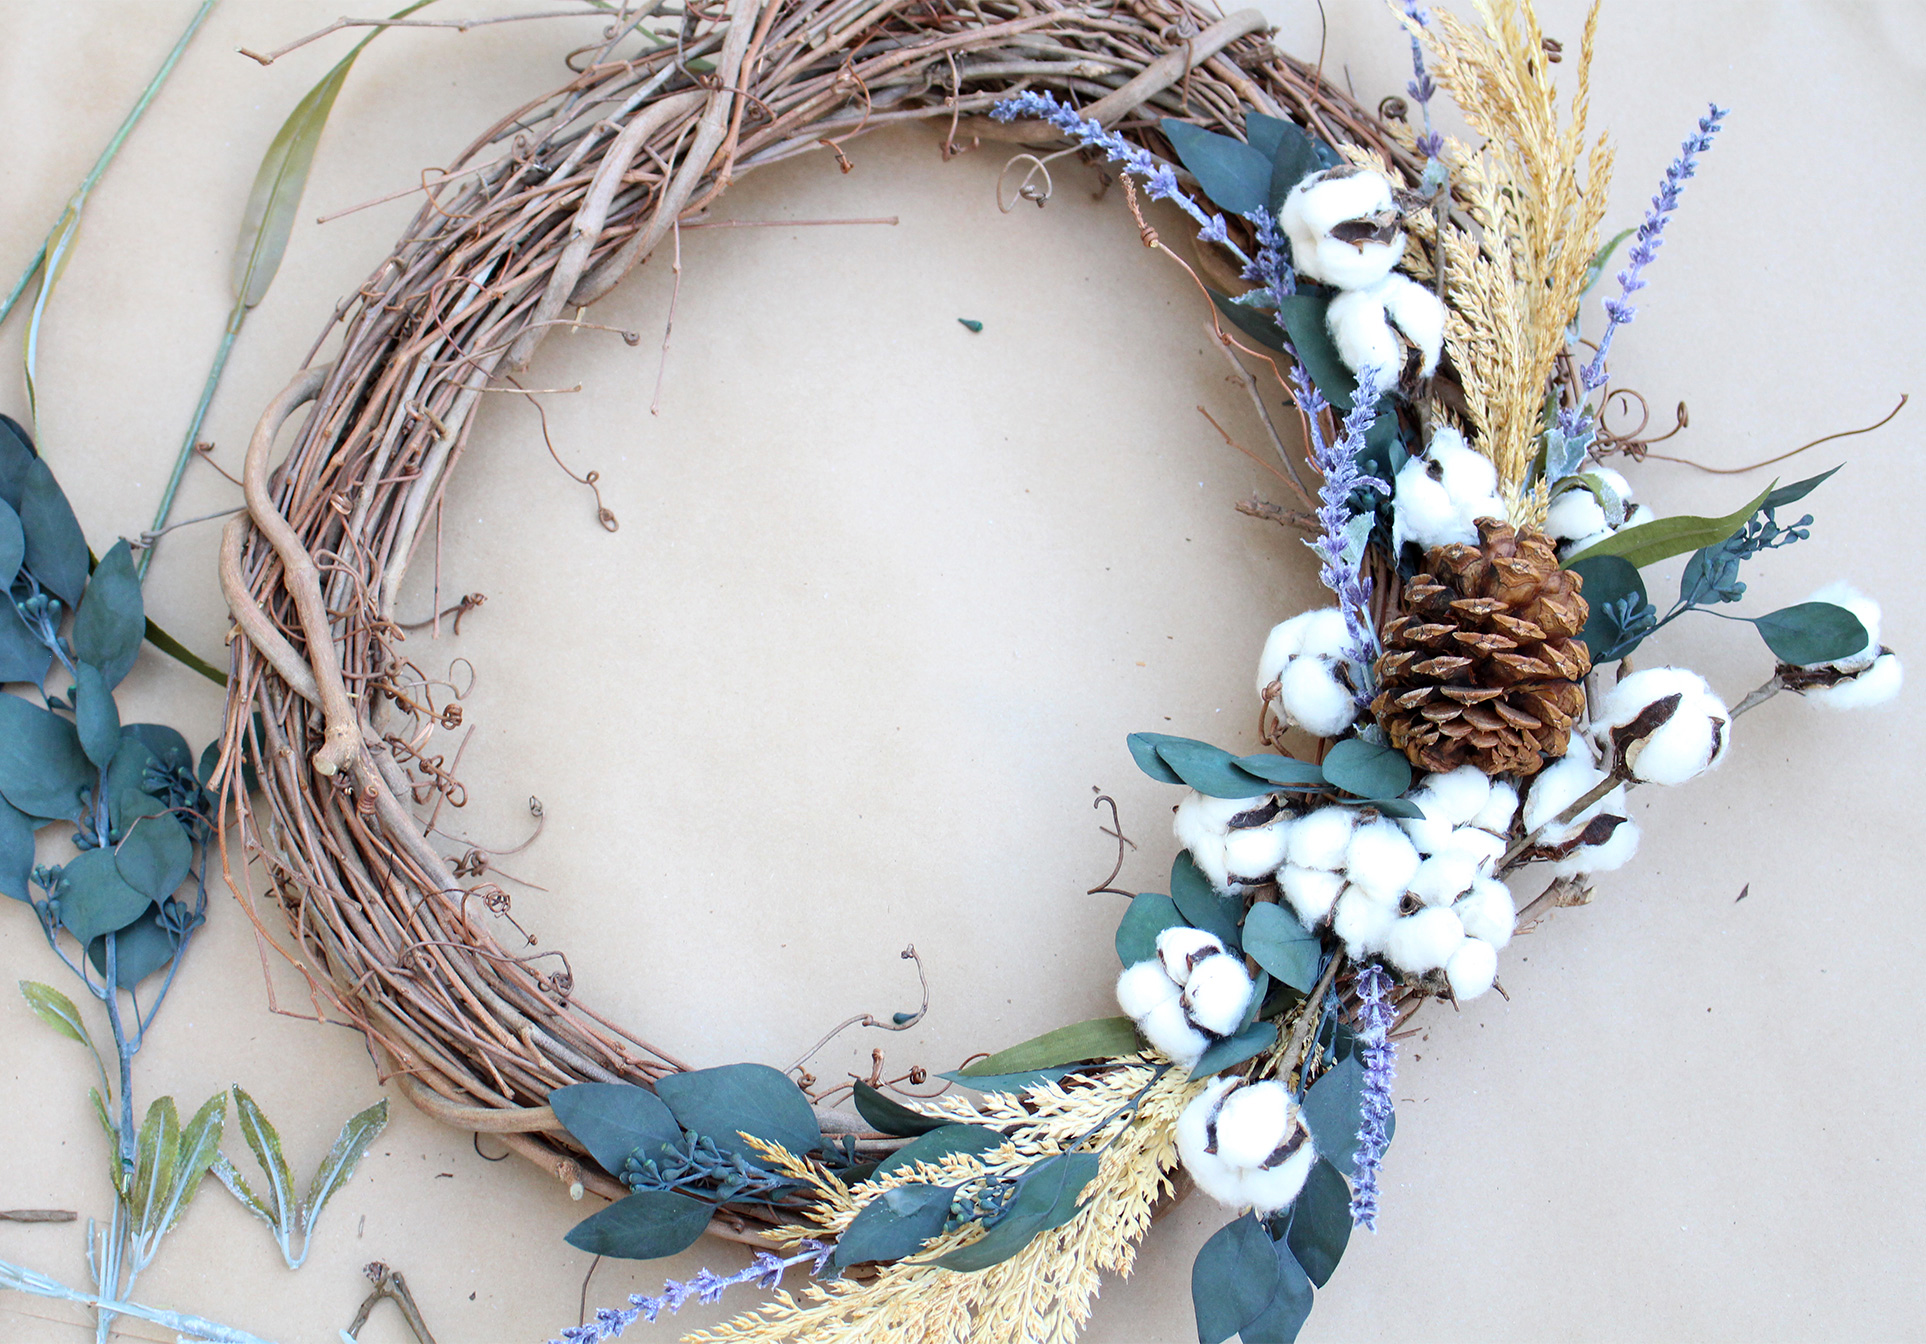 Use raw cotton, lavender, eucalyptus and pinecones to make a pretty DIY fall wreath